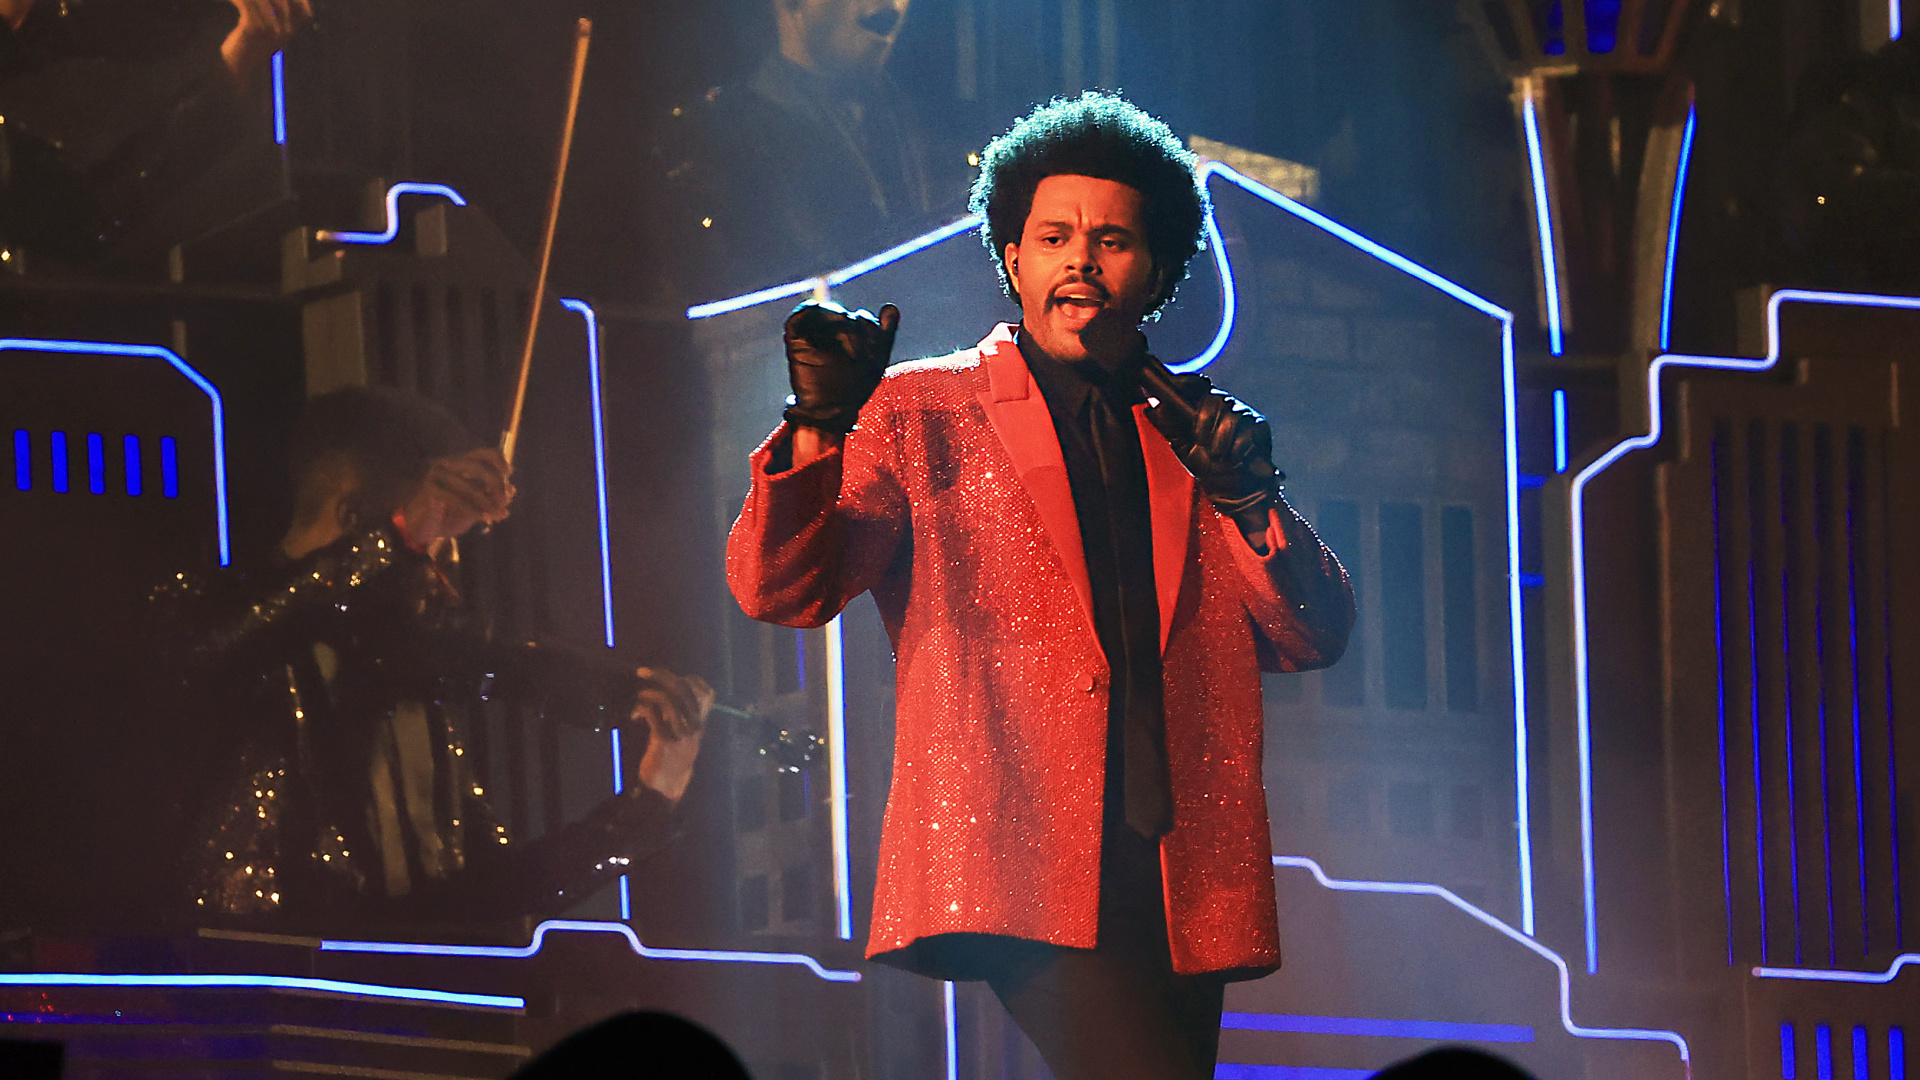 Watch The Weeknd's Full Super Bowl LV Halftime Performance